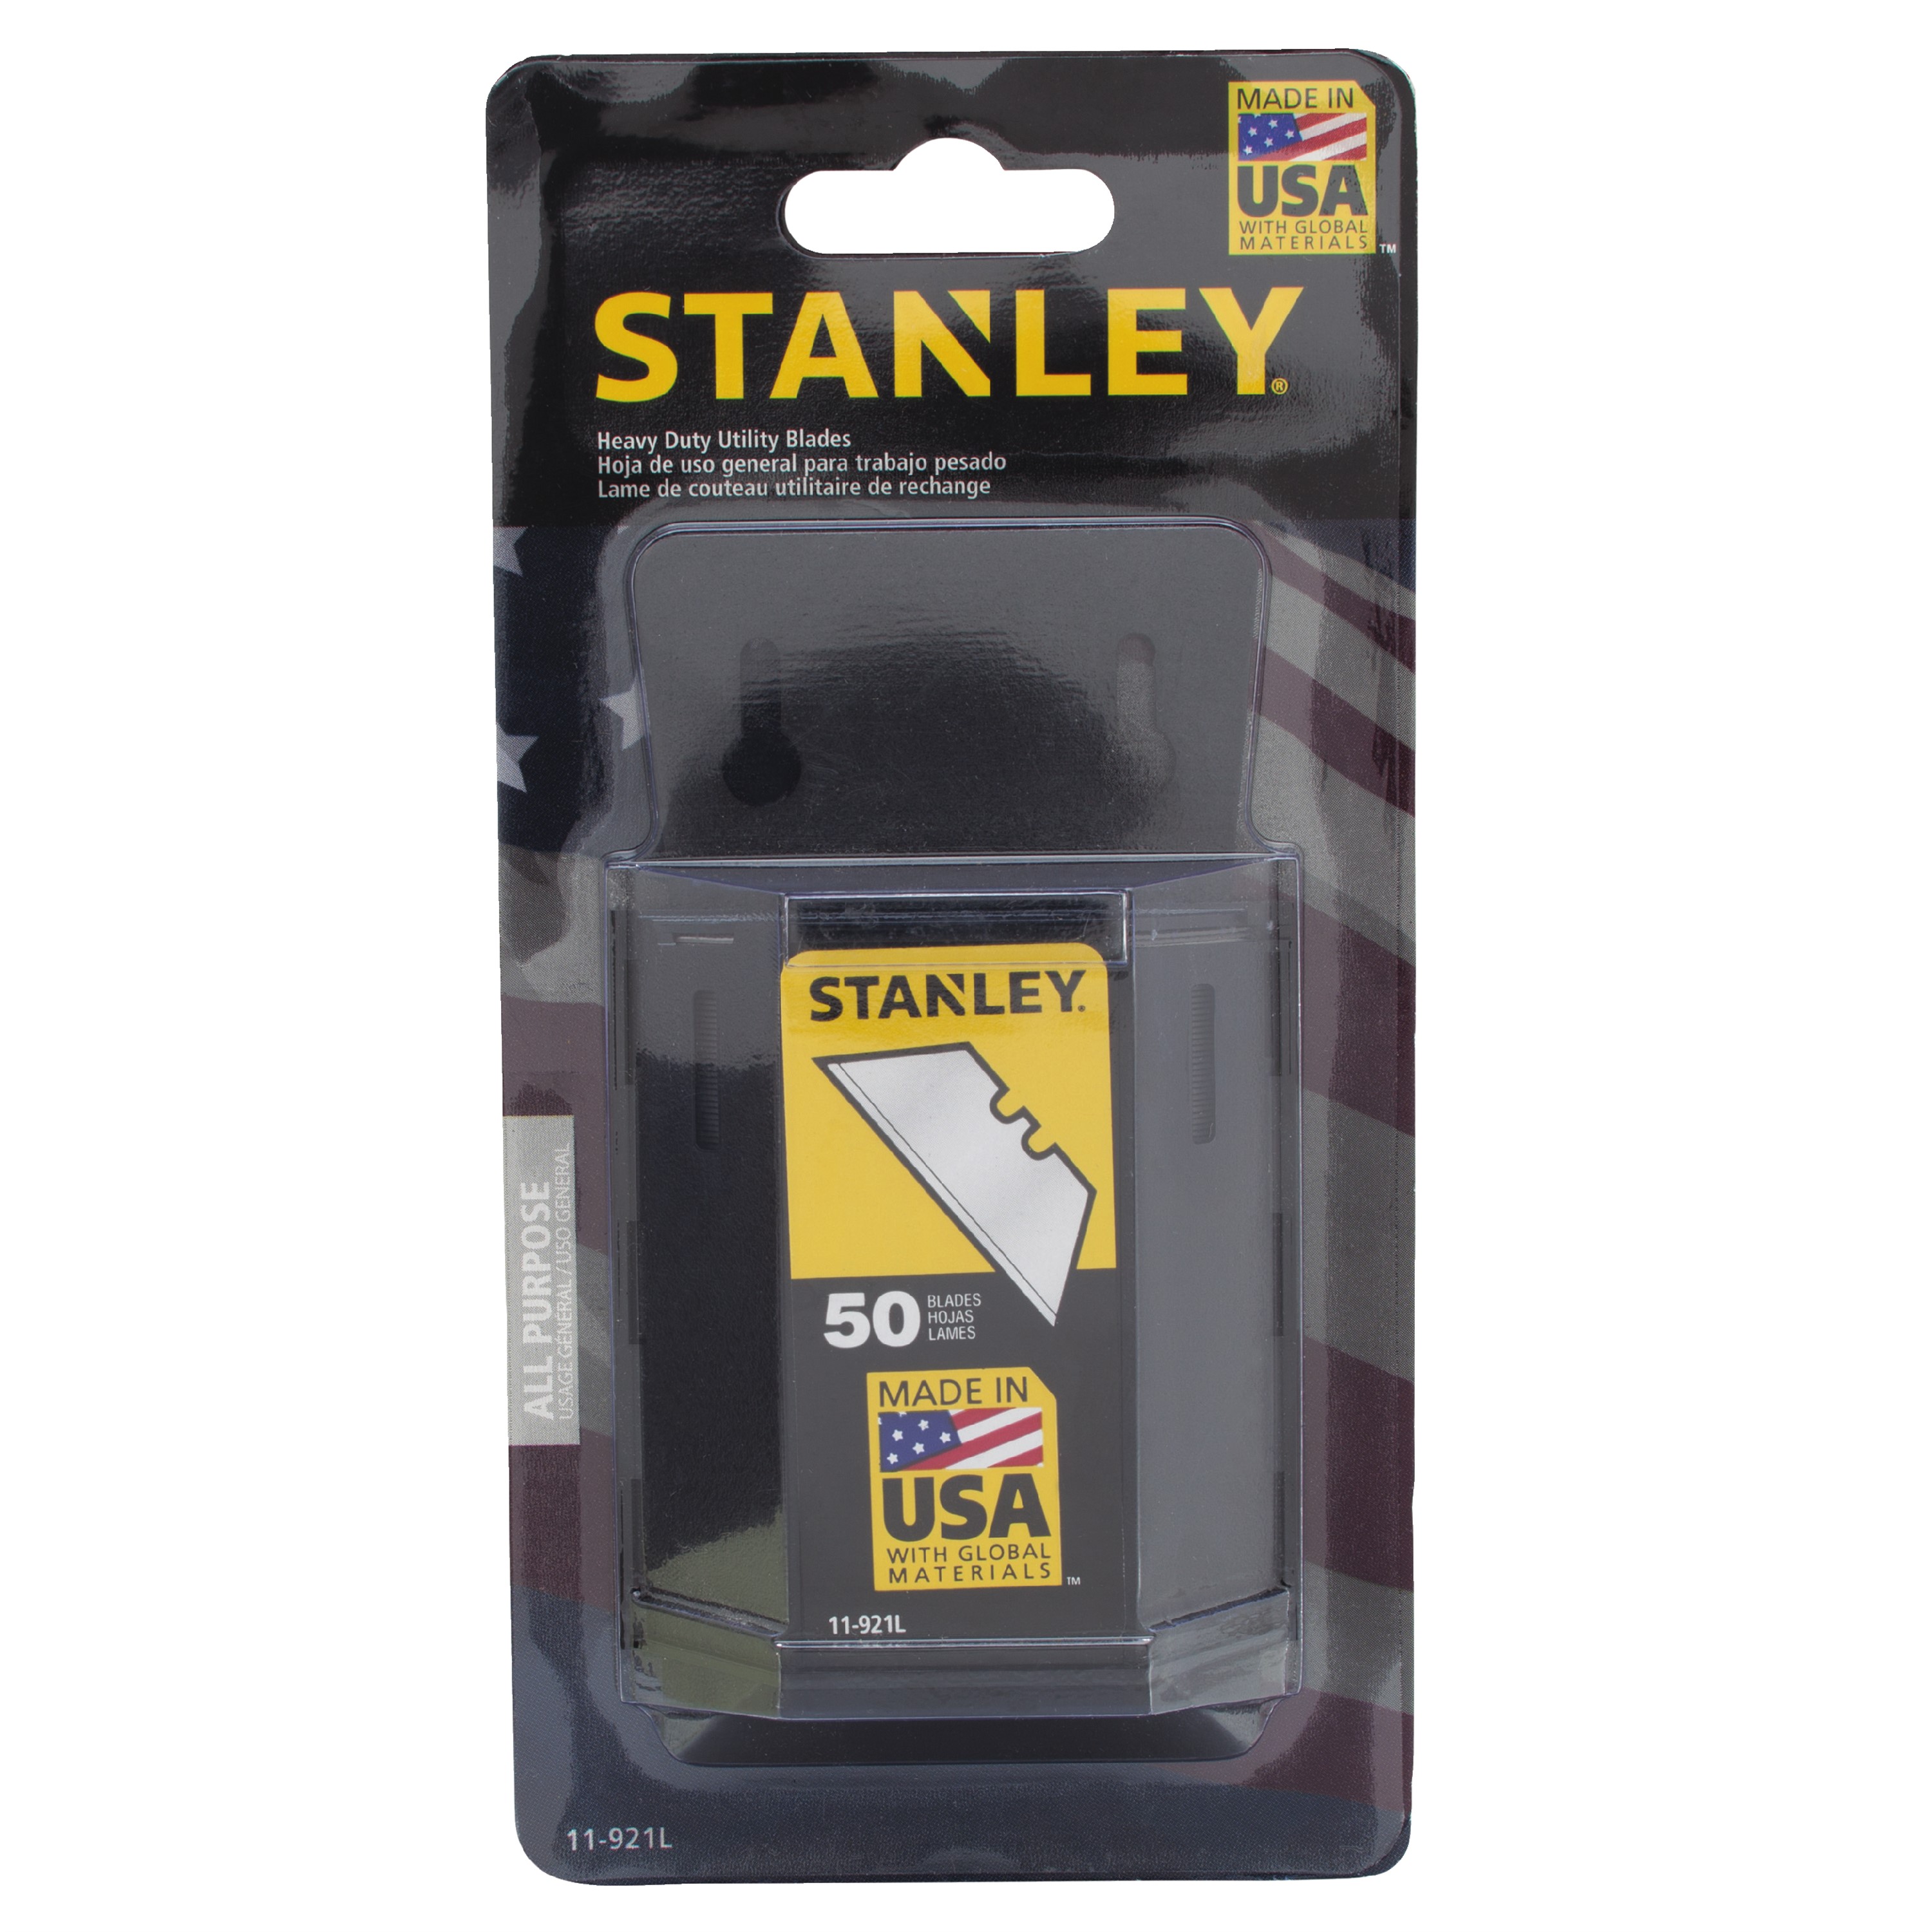 STANLEY 11-921L 50pk 1992 Heavy-Duty Utility Blades With Dispenser - image 1 of 3